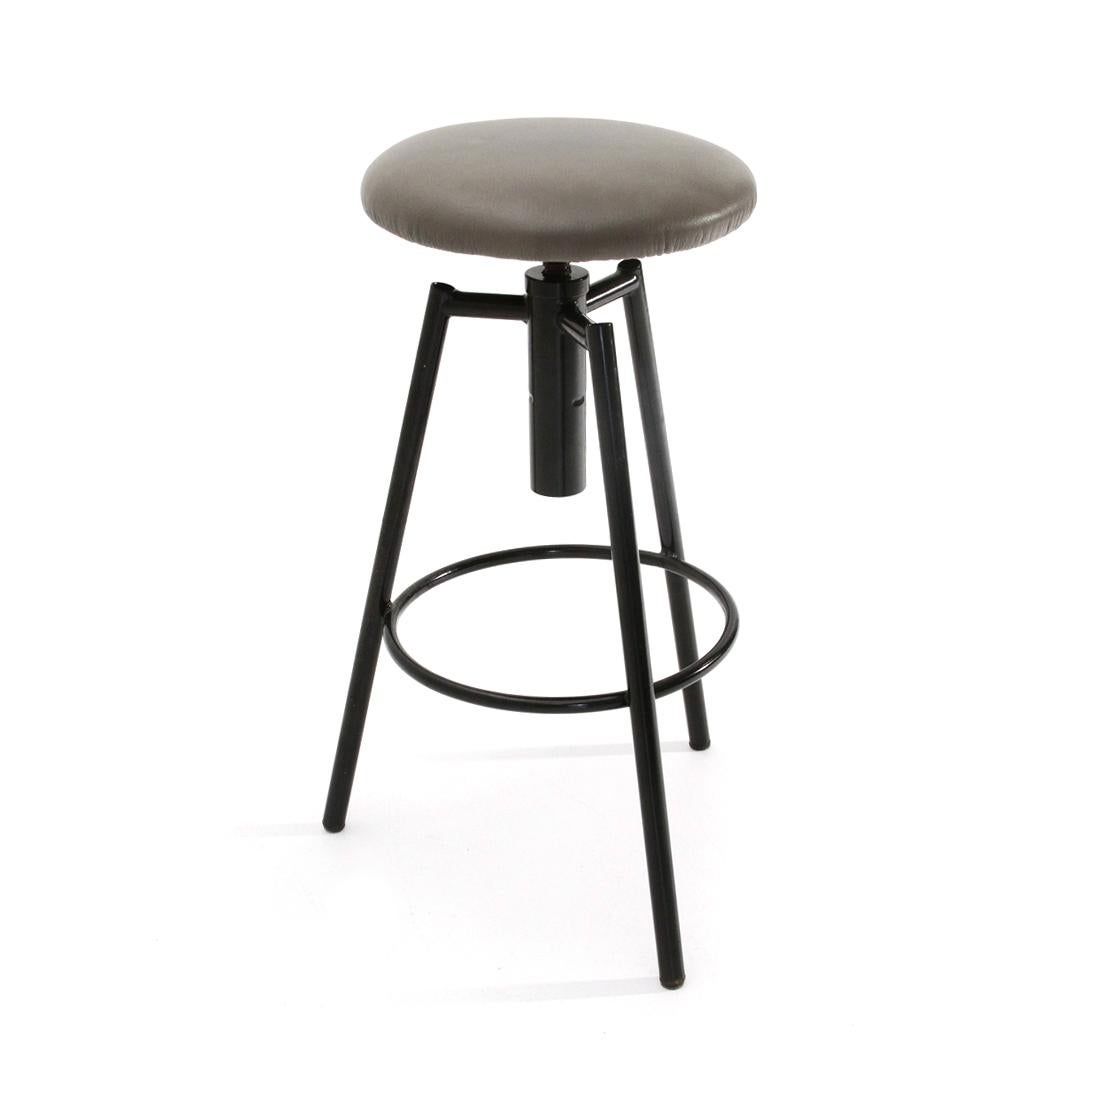 Italian Metal Stool with Padded Seat, 1960s For Sale